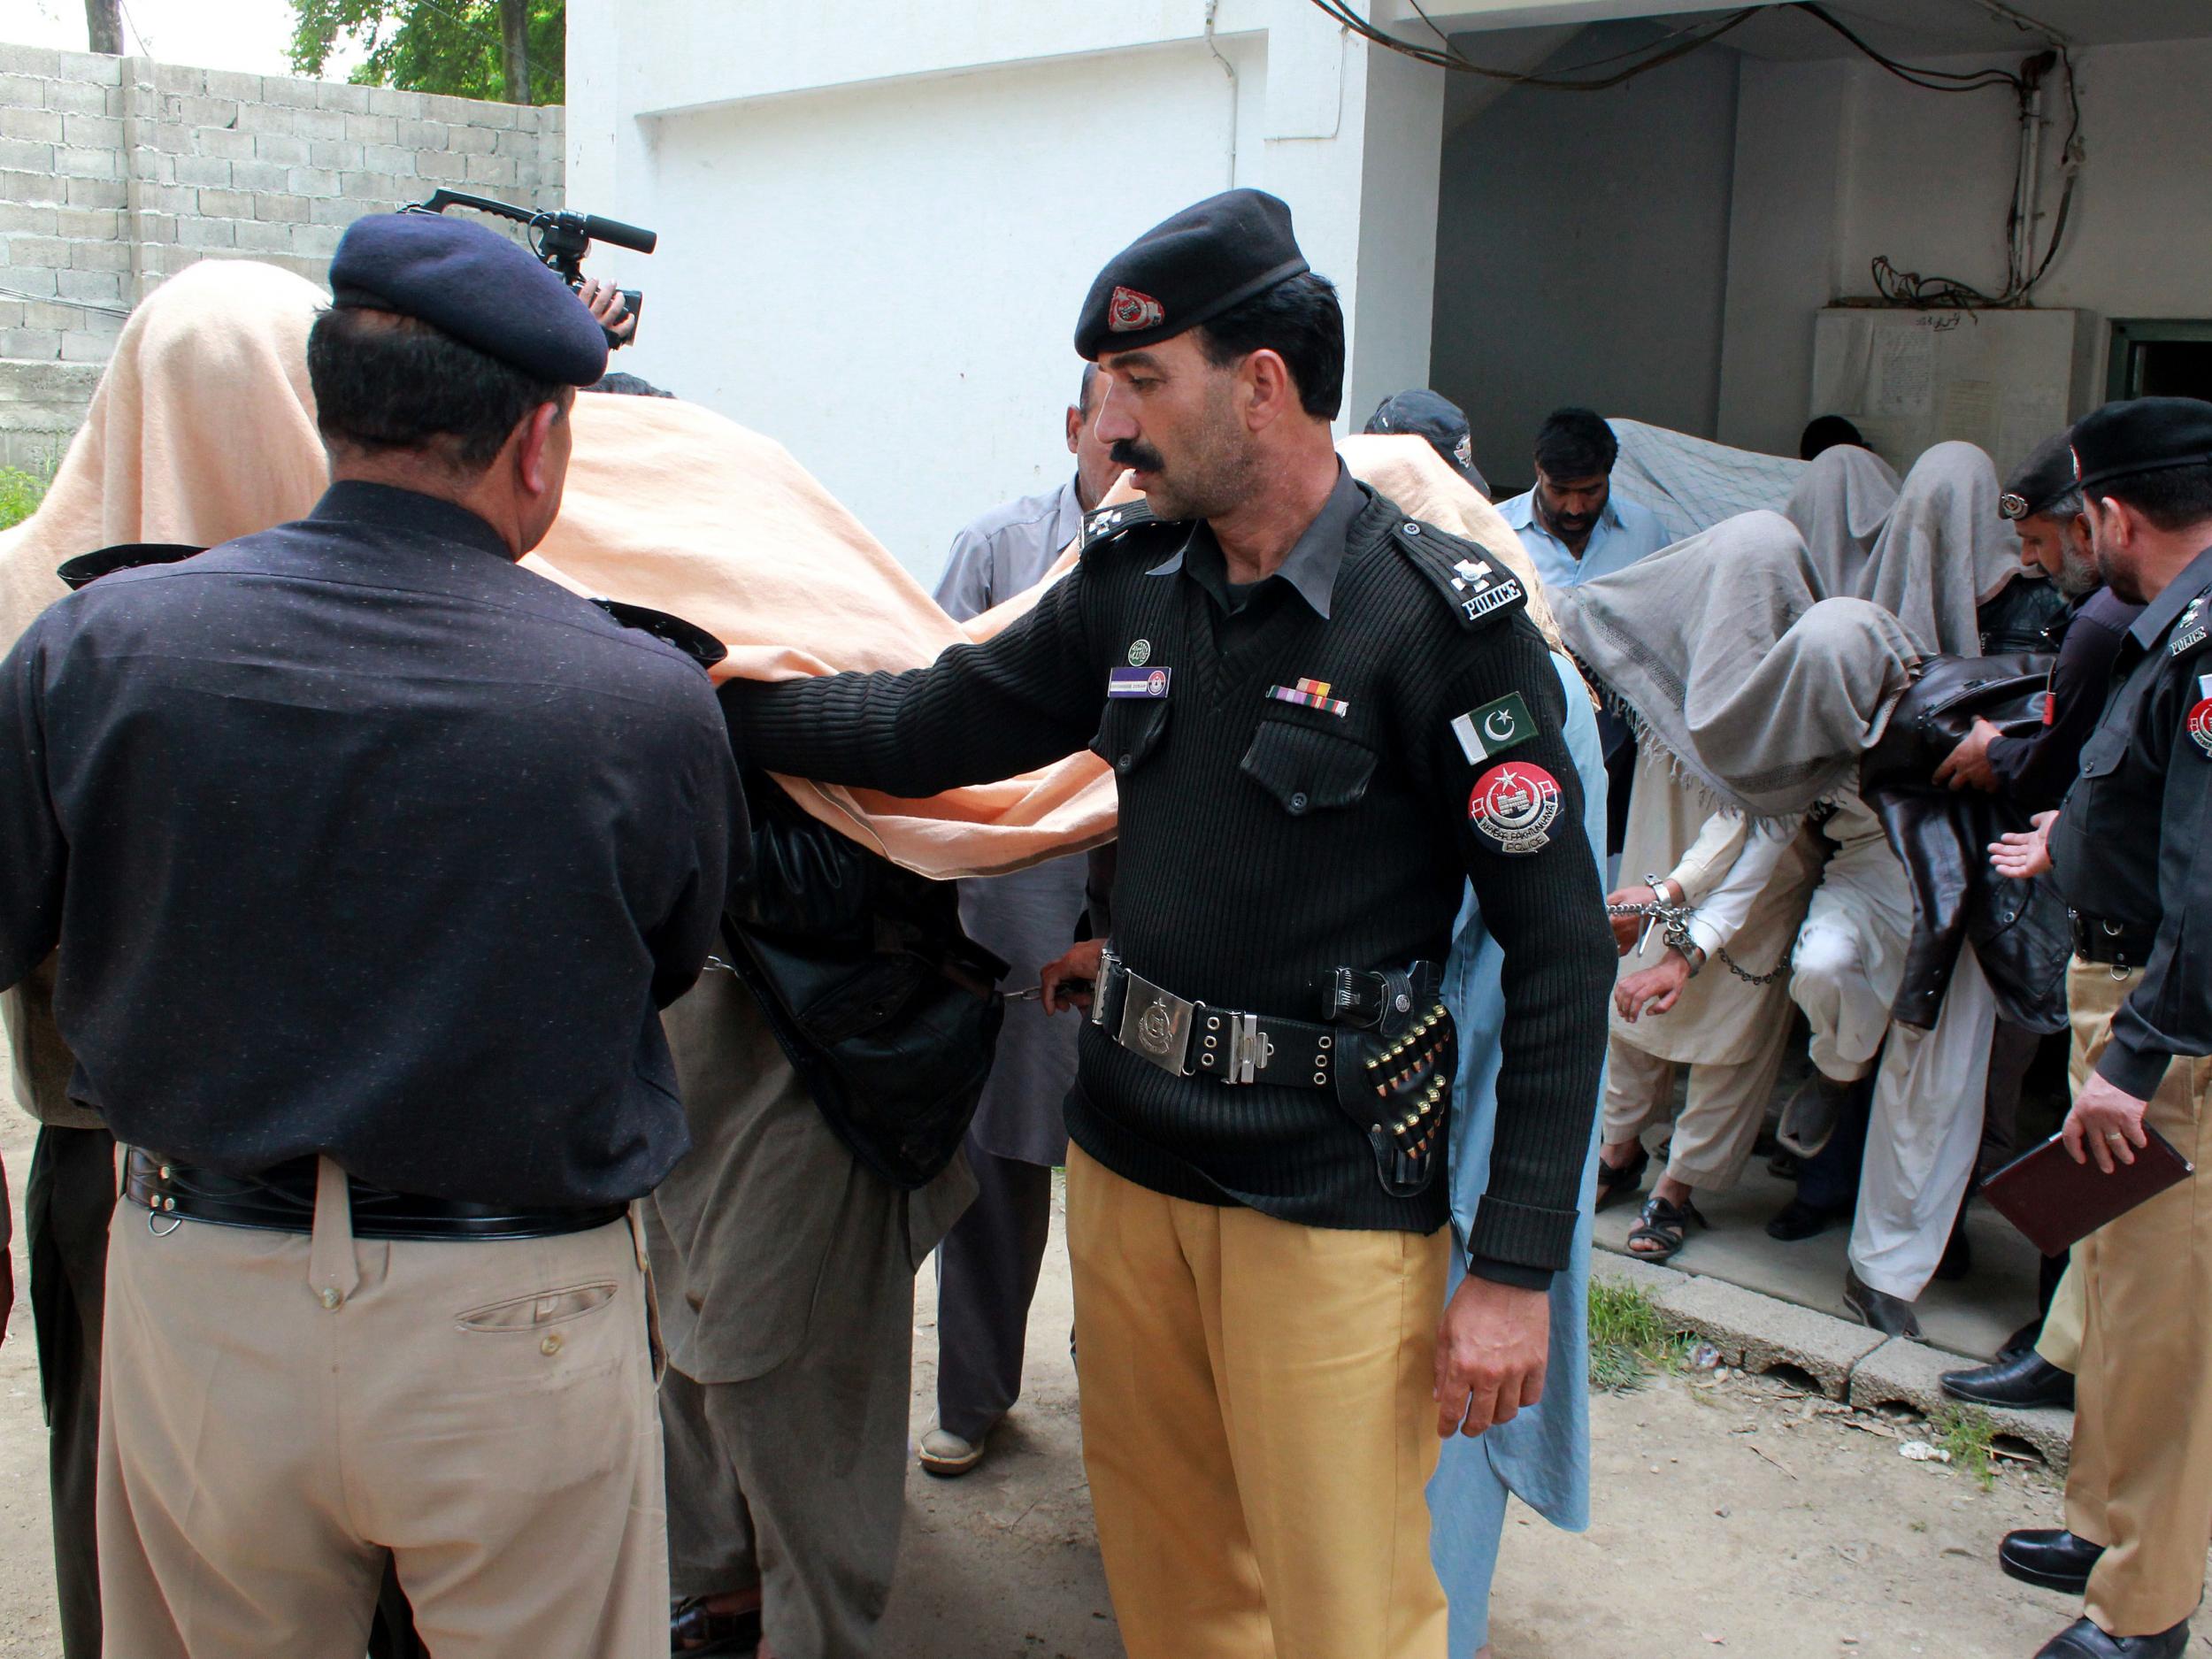 Pakistani police officers escort members of a local tribal council, who have been arrested for burning a girl alive, outside a court in Abbottabad, Pakistan, on Thursday